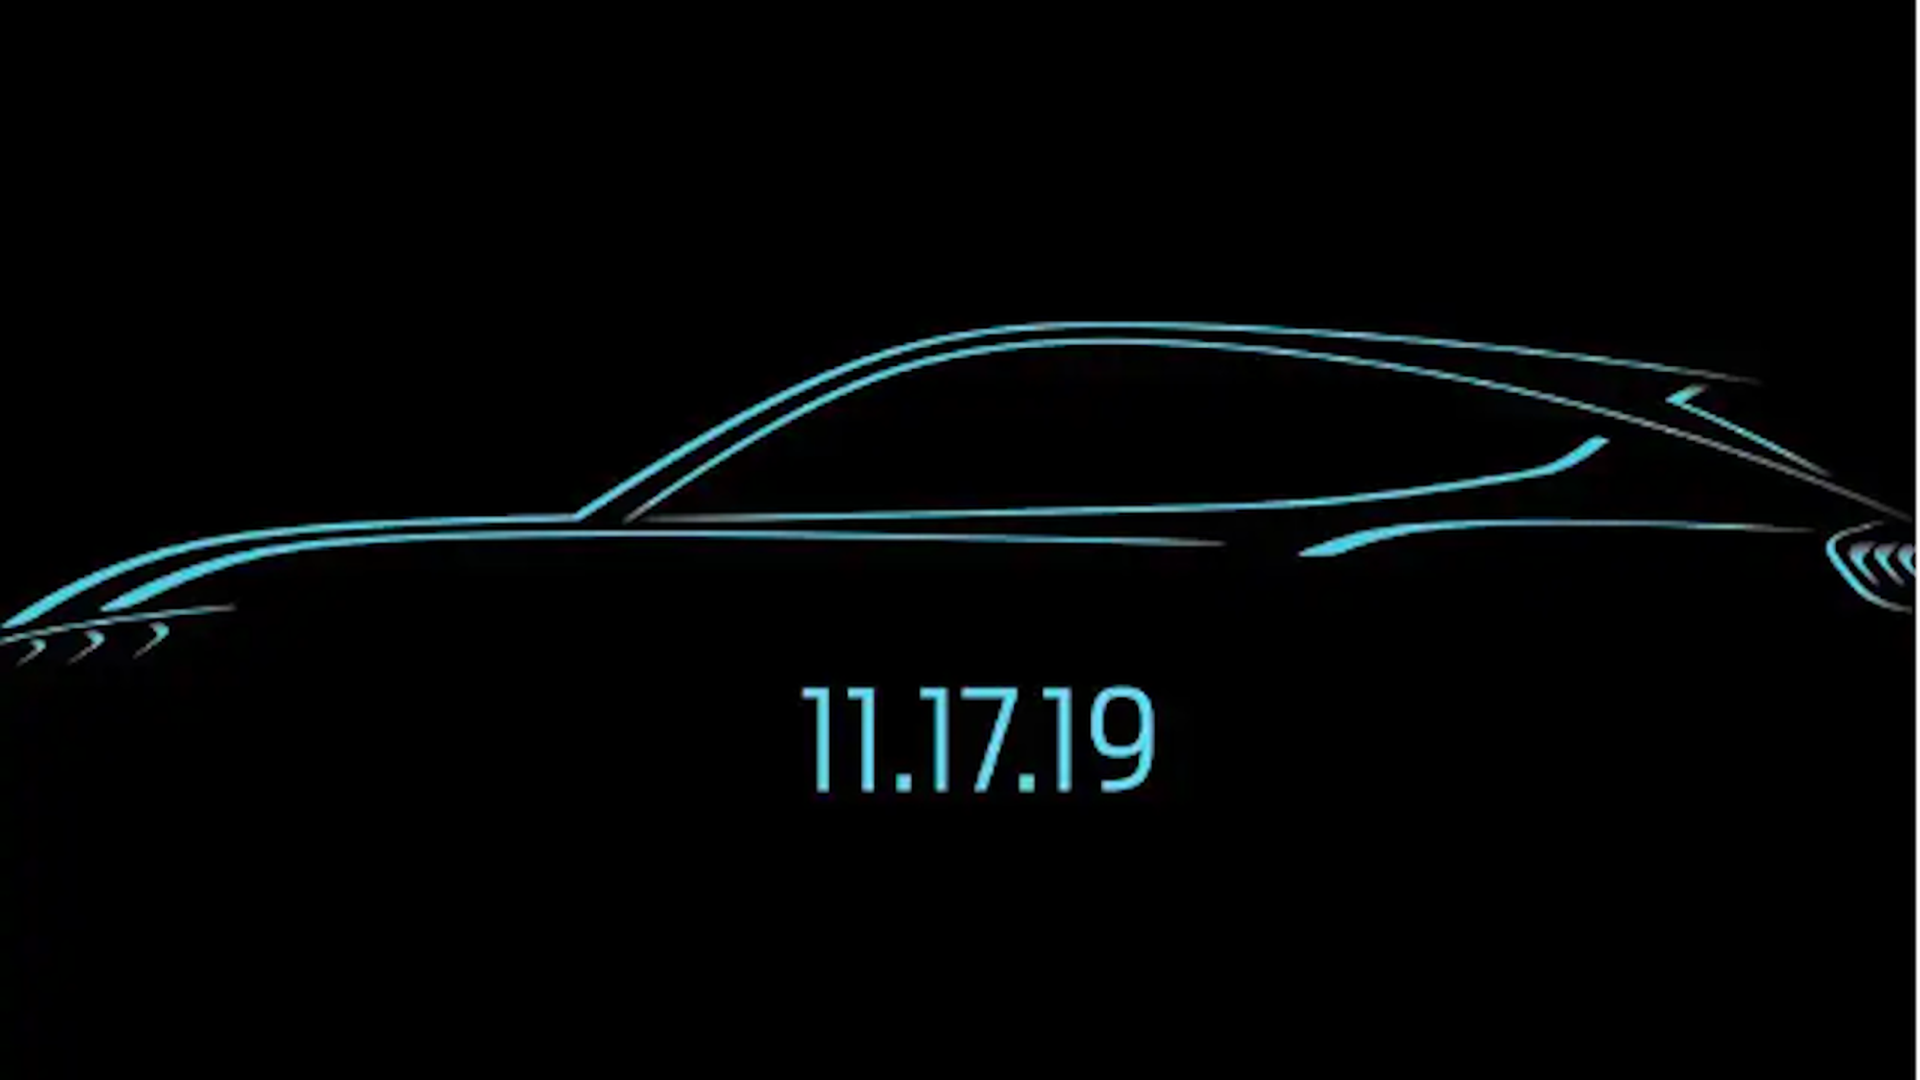 A teaser for Ford's new electric vehicle